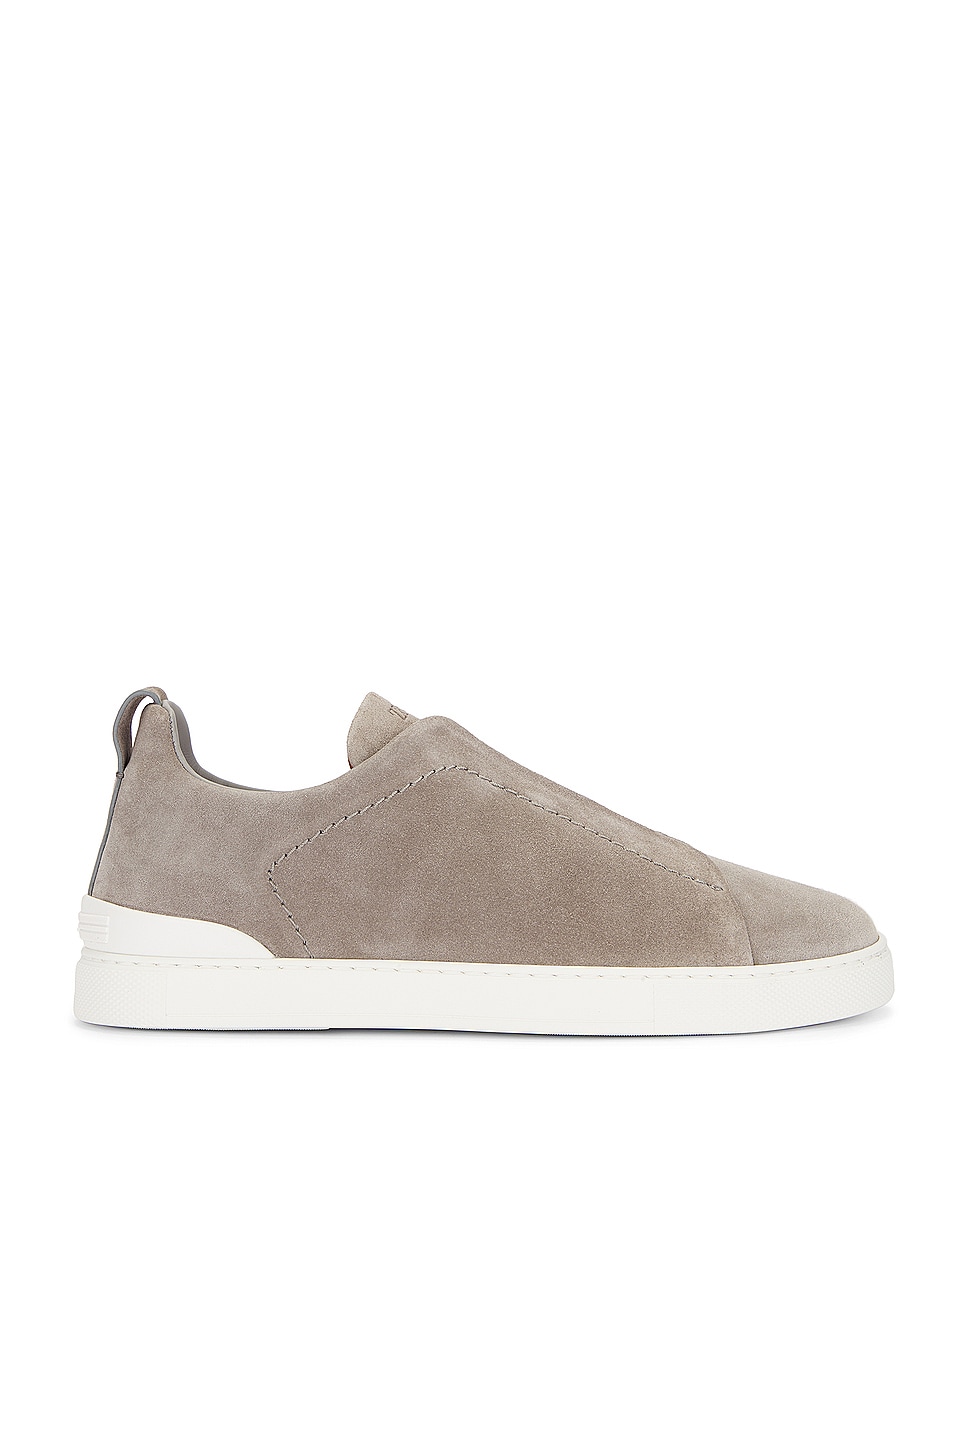 Image 1 of Zegna Triple Stitch Low Top Sneaker in Grey